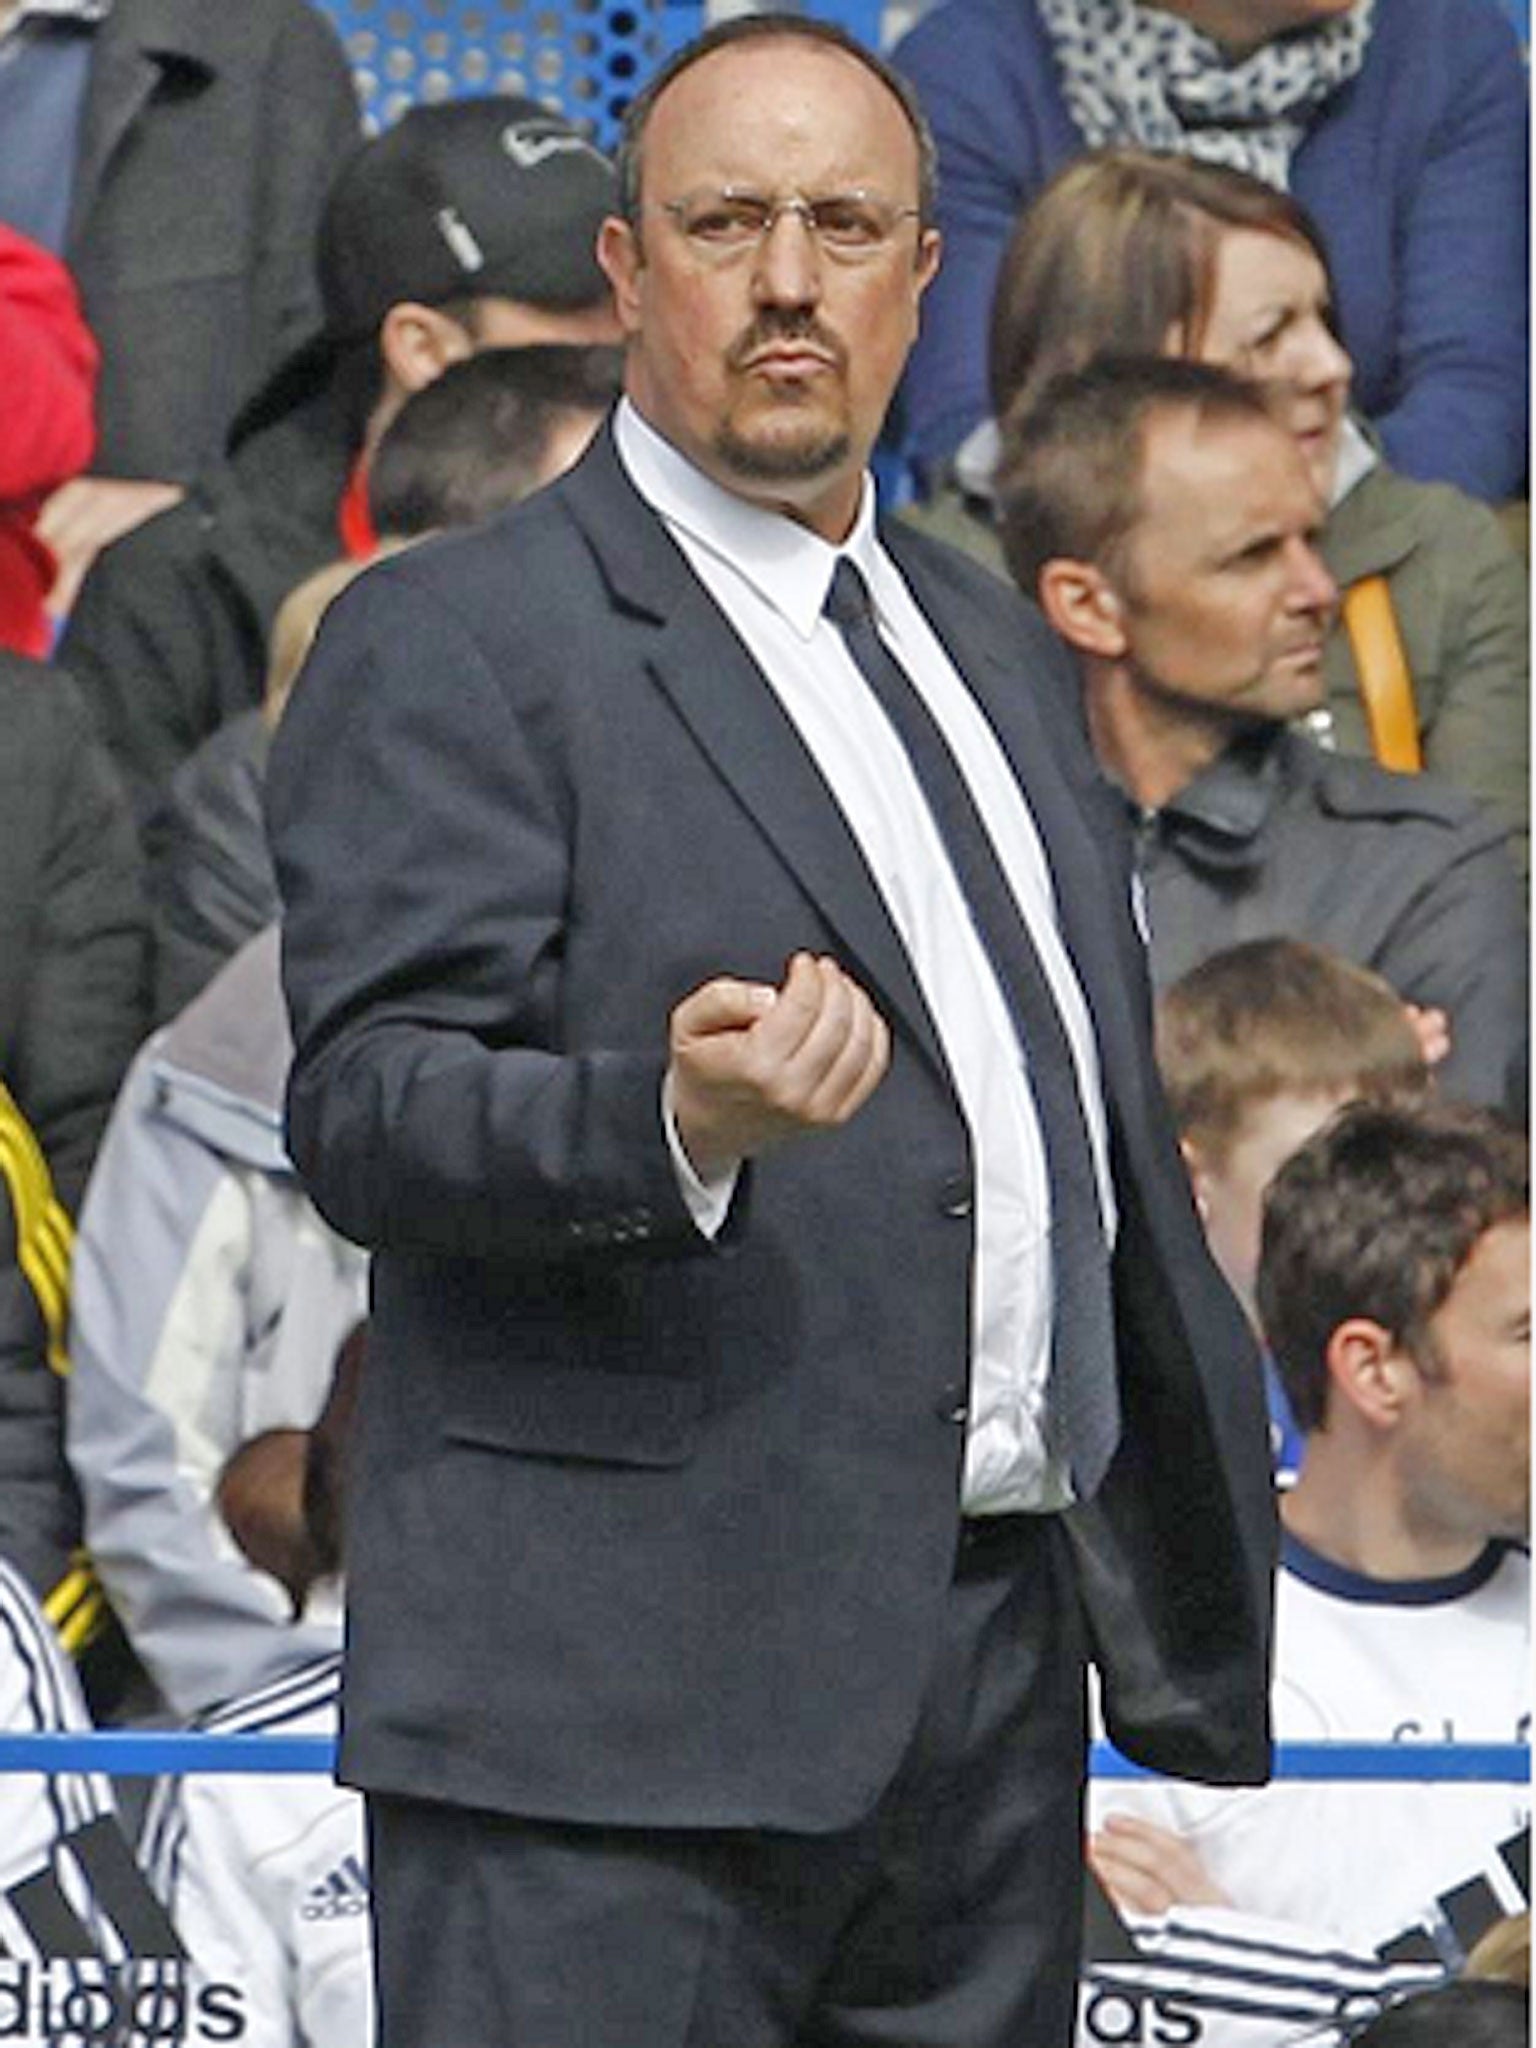 Rafa Benitez accepts he will not win over the Chelsea fans